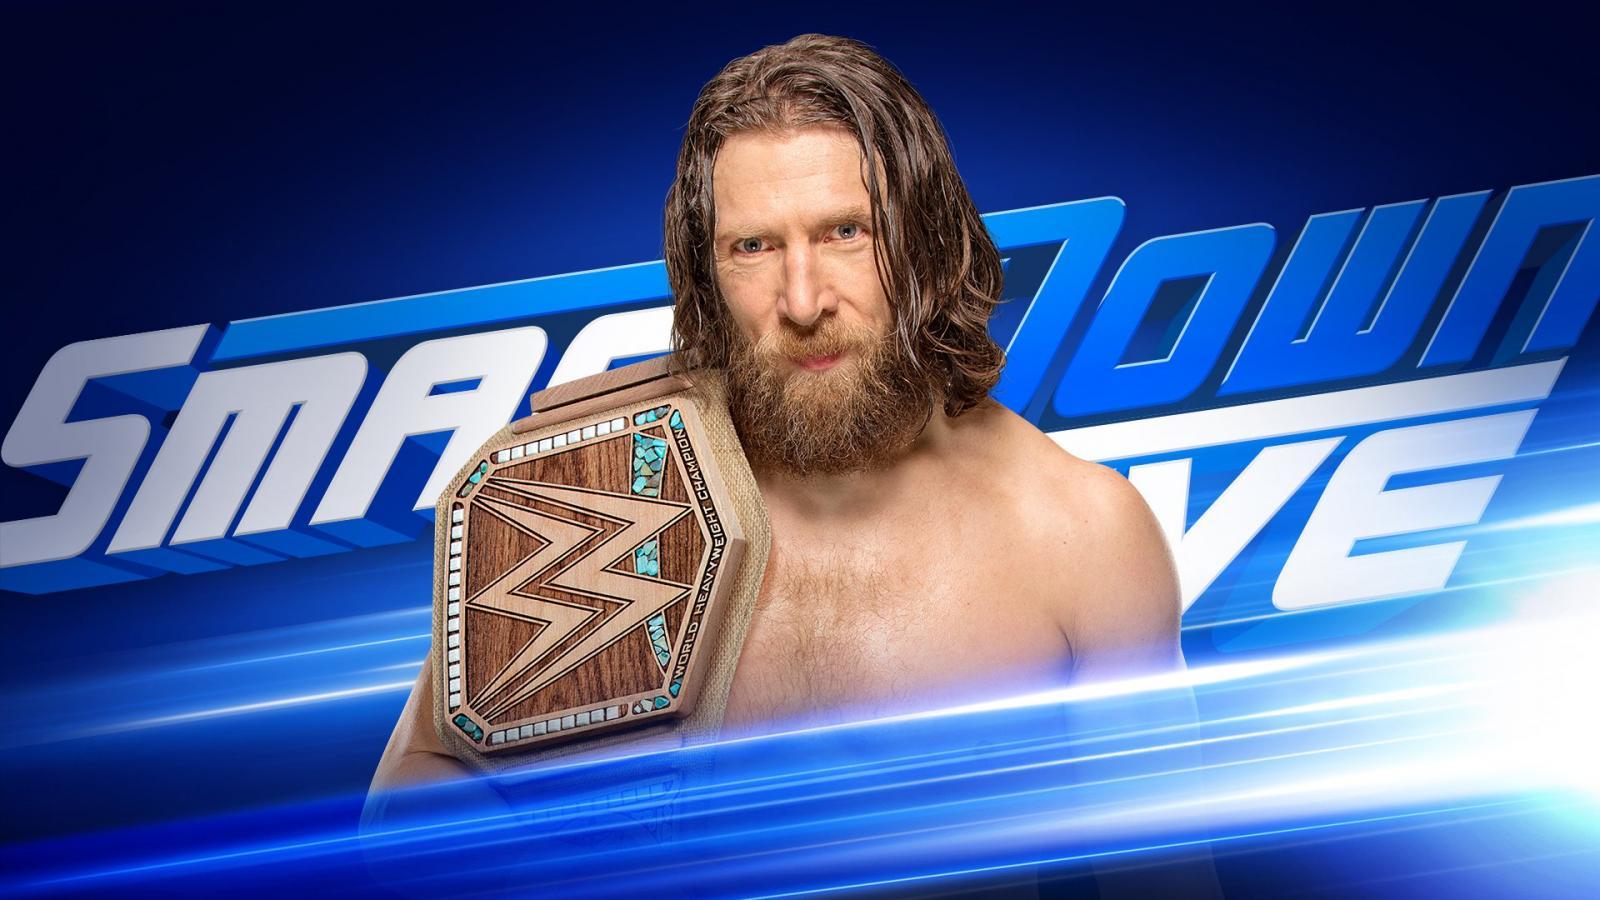 WWE Smackdown Live preview and schedule: February 2019